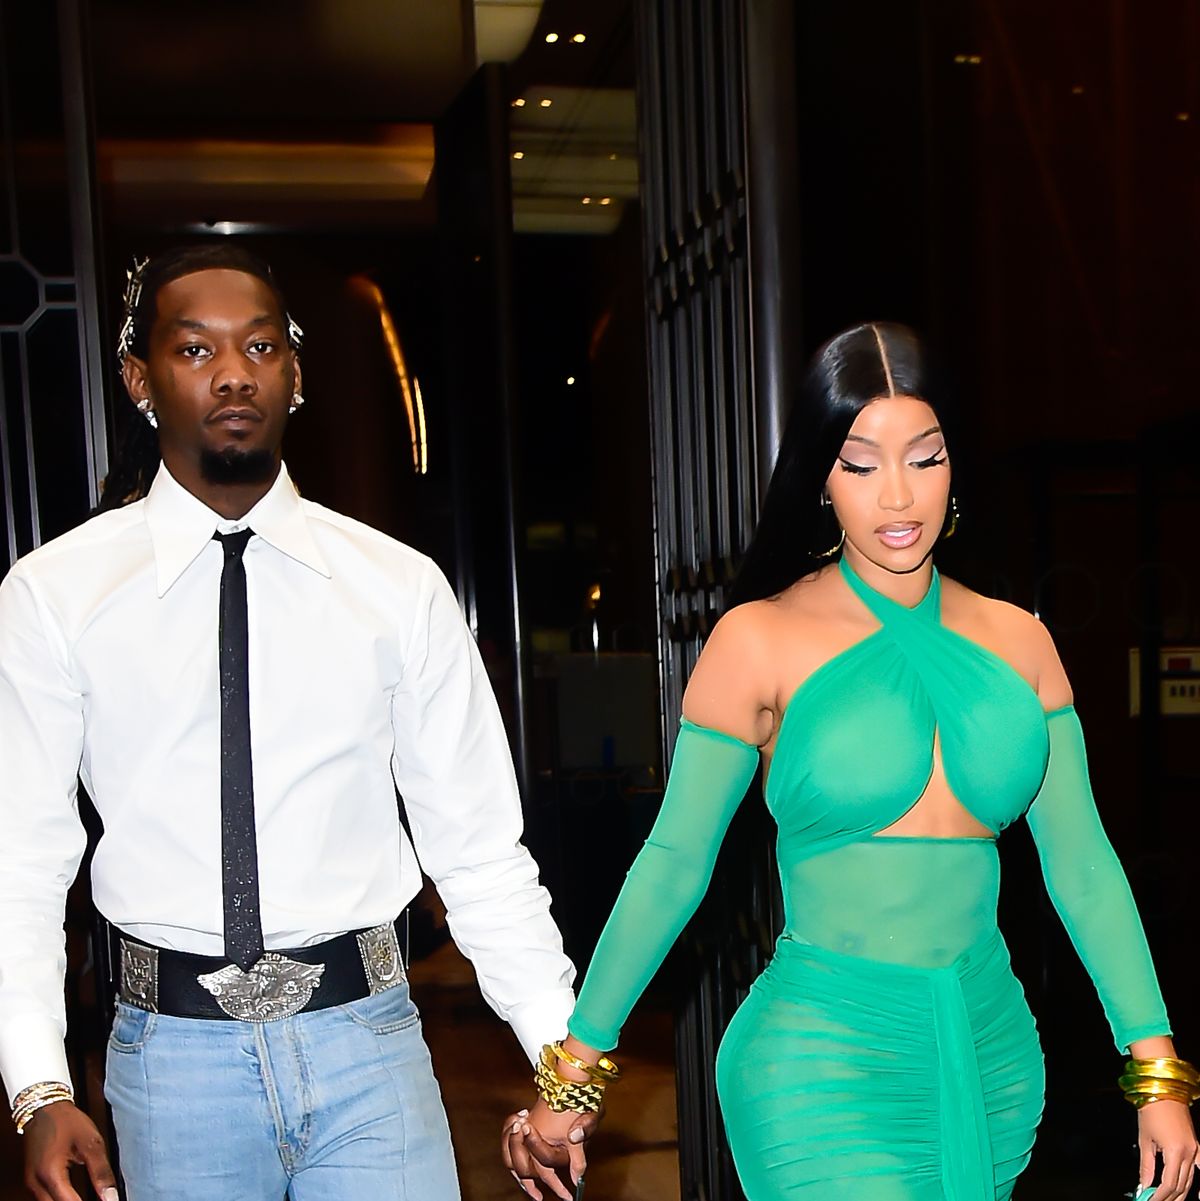 Cardi B and Offset's Full Relationship and Breakup Timeline